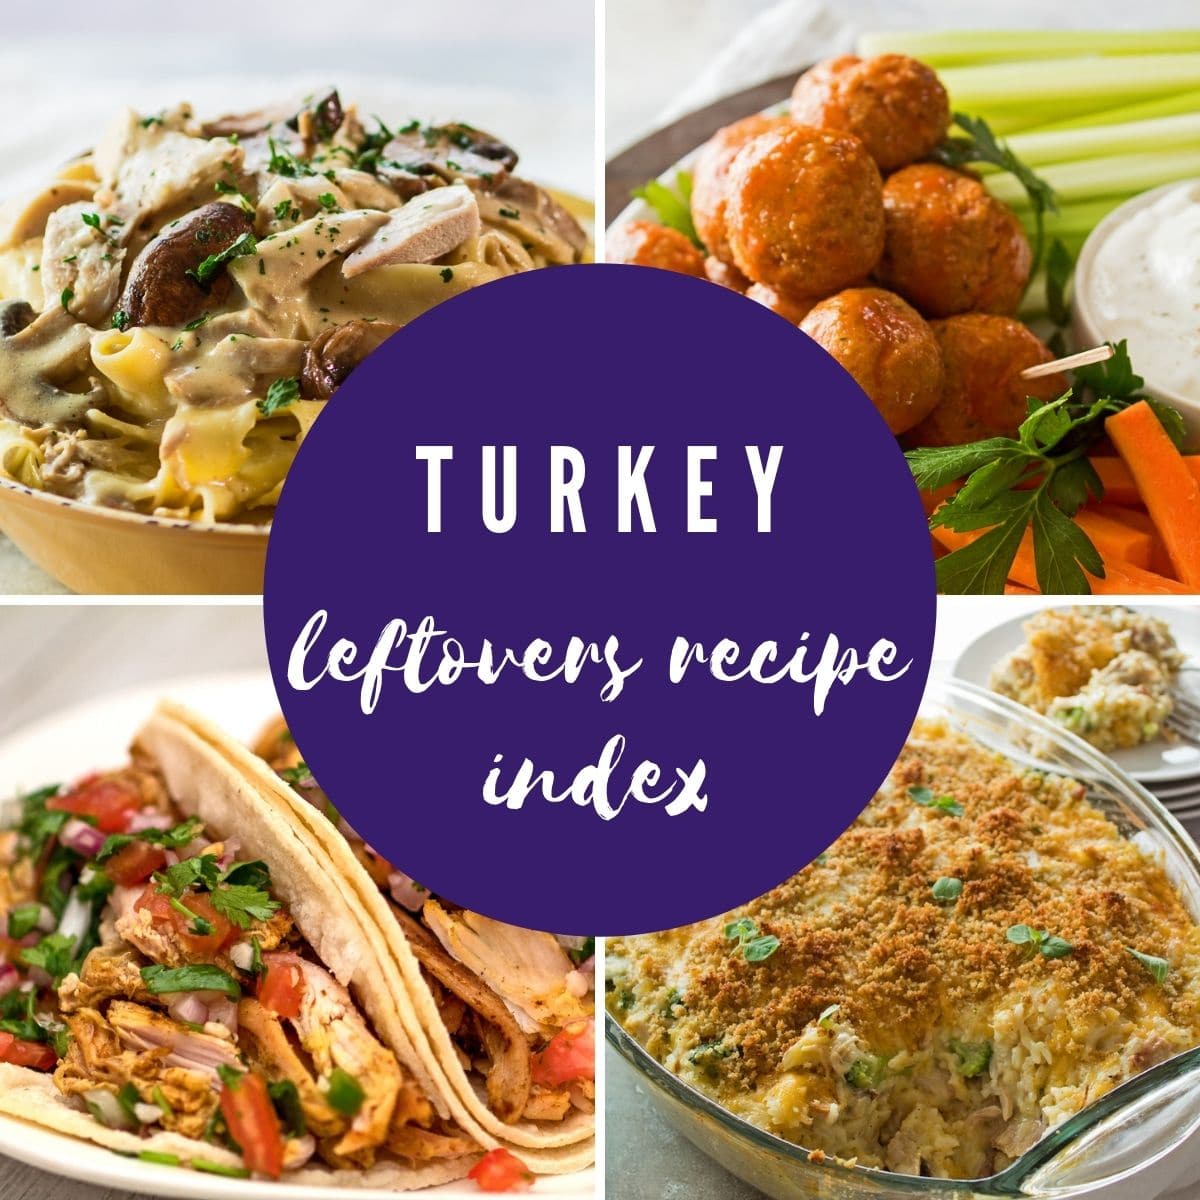 Leftover turkey recipes collage photo with text overlay.